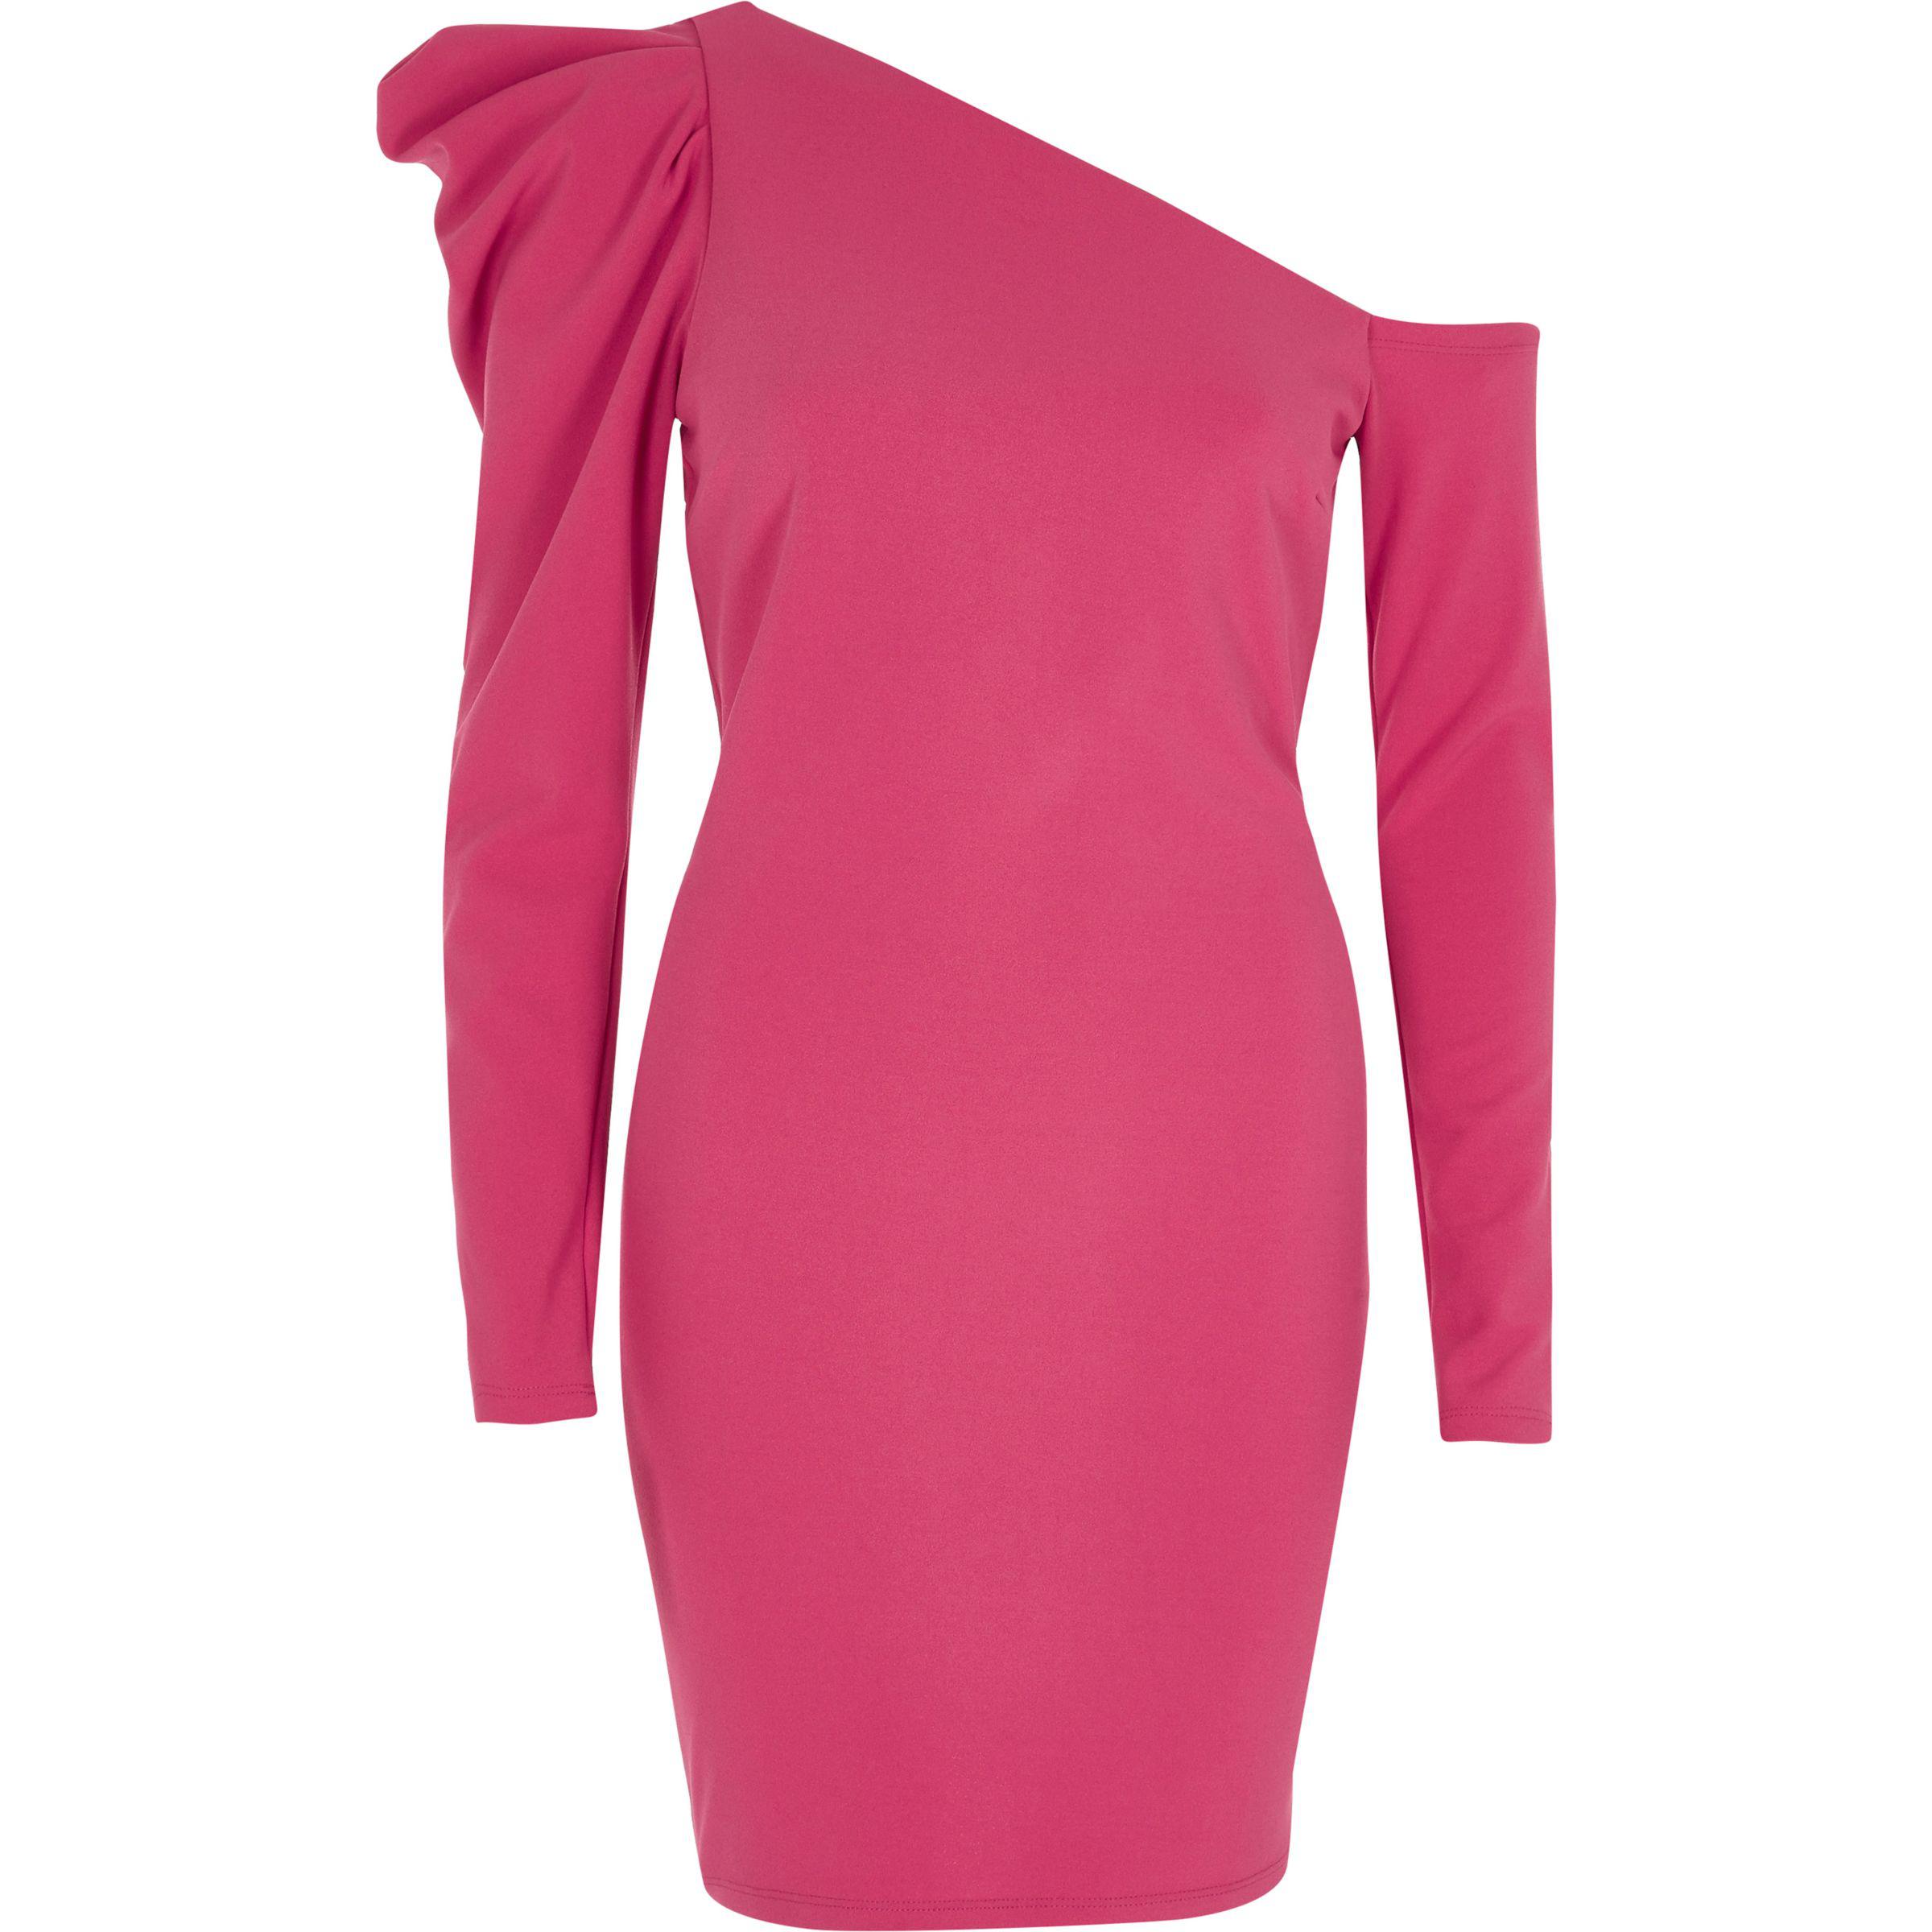 Lyst - River Island Pink One Shoulder Puff Sleeve Bodycon Dress in Pink